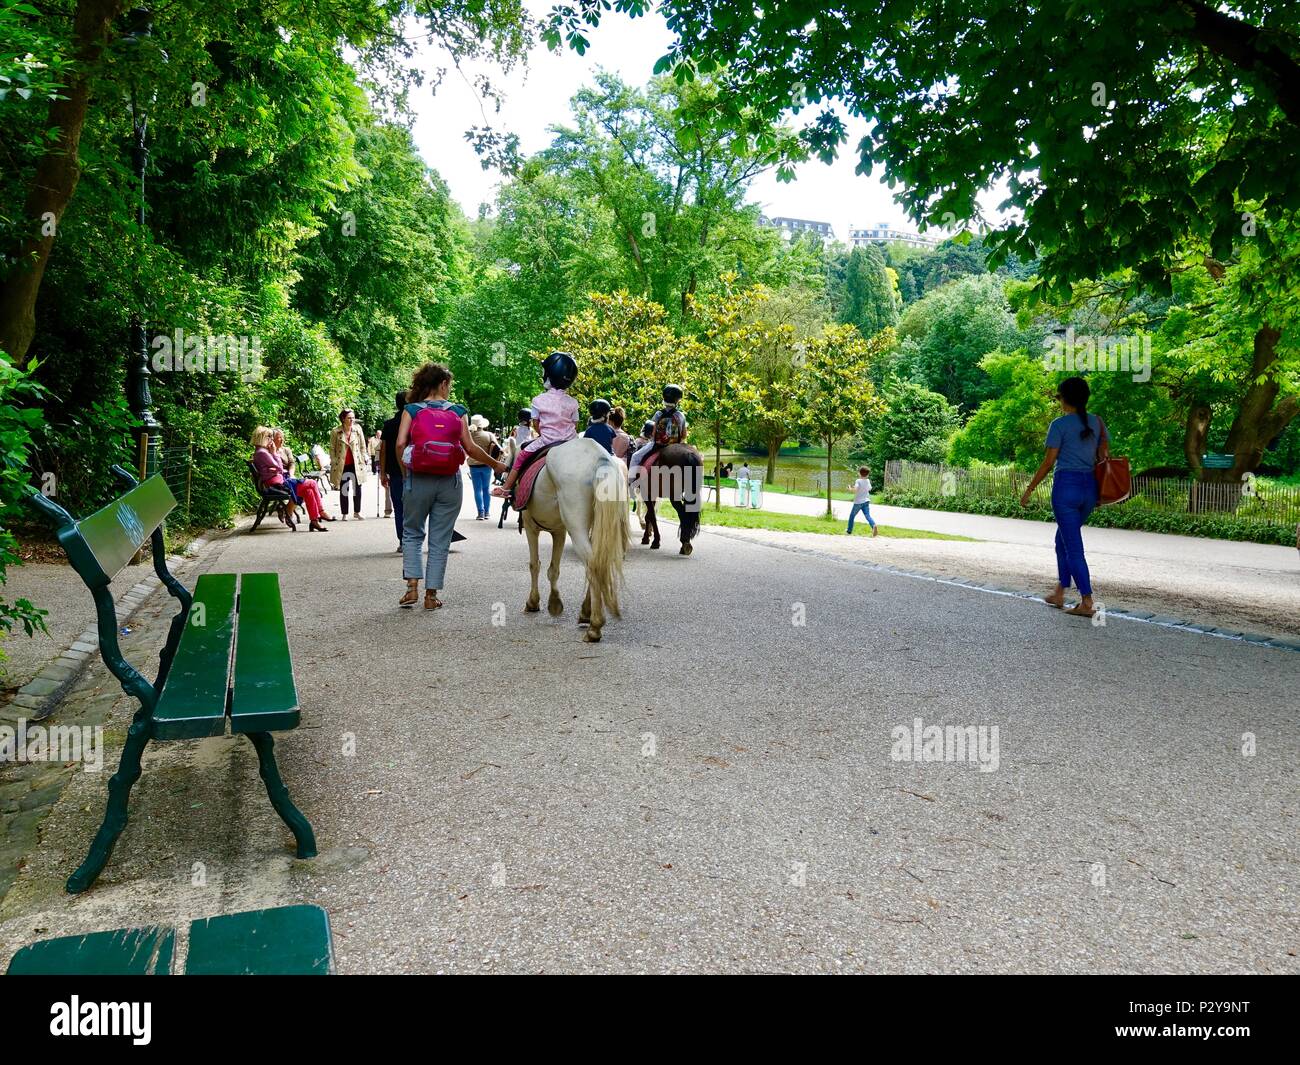 Children riding ponies on a warm Saturday afternoon at Parc Buttes Chaumont in northeastern Paris, France Stock Photo